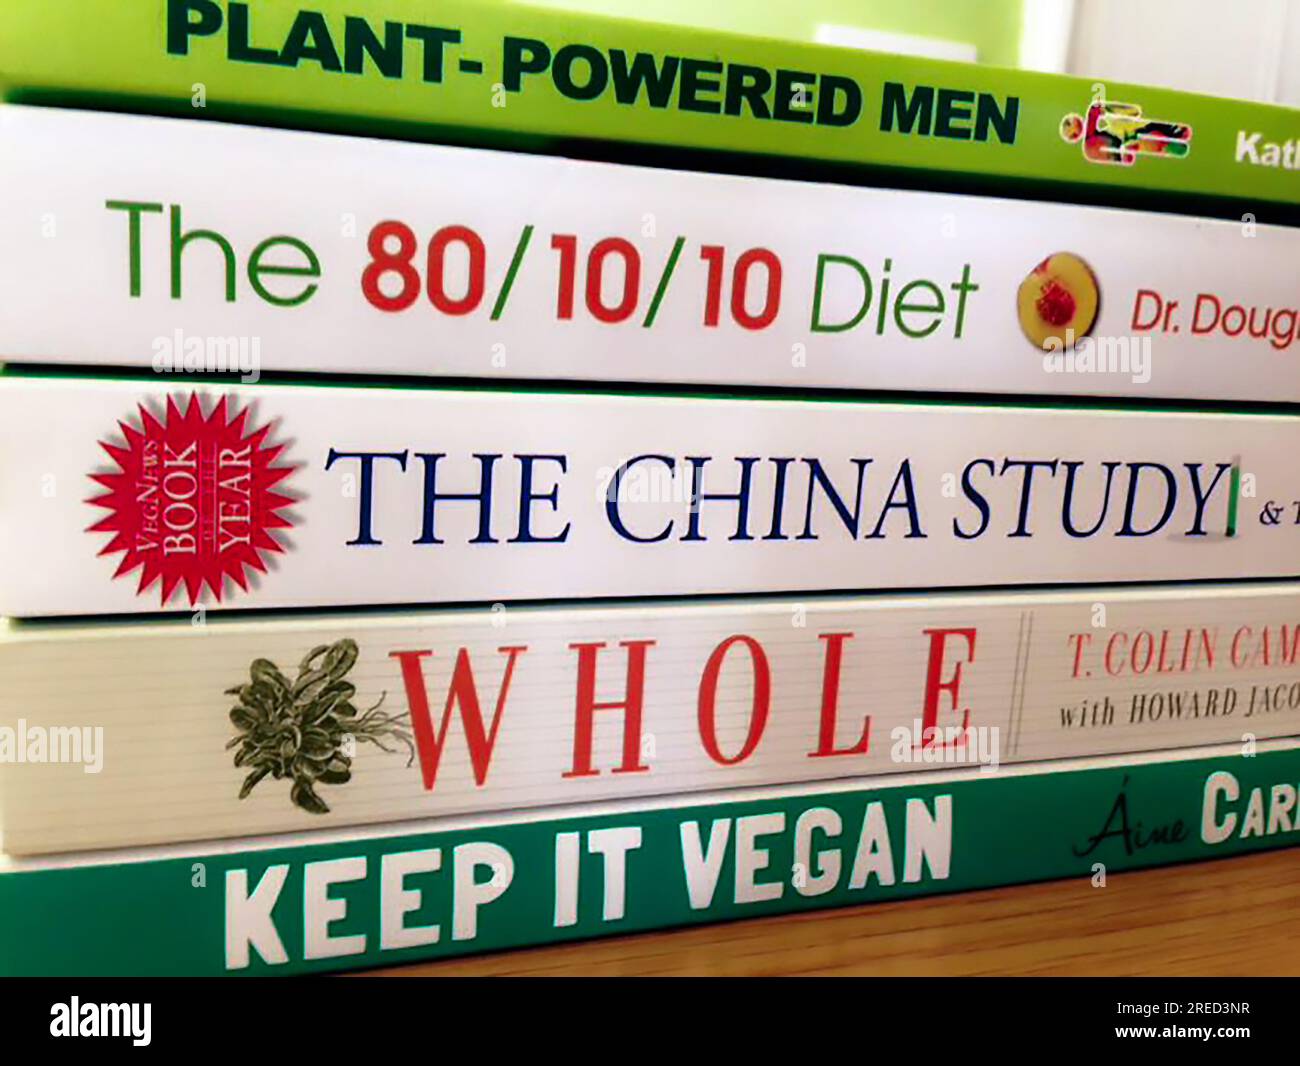 Healthy eating living plant based books Stock Photo